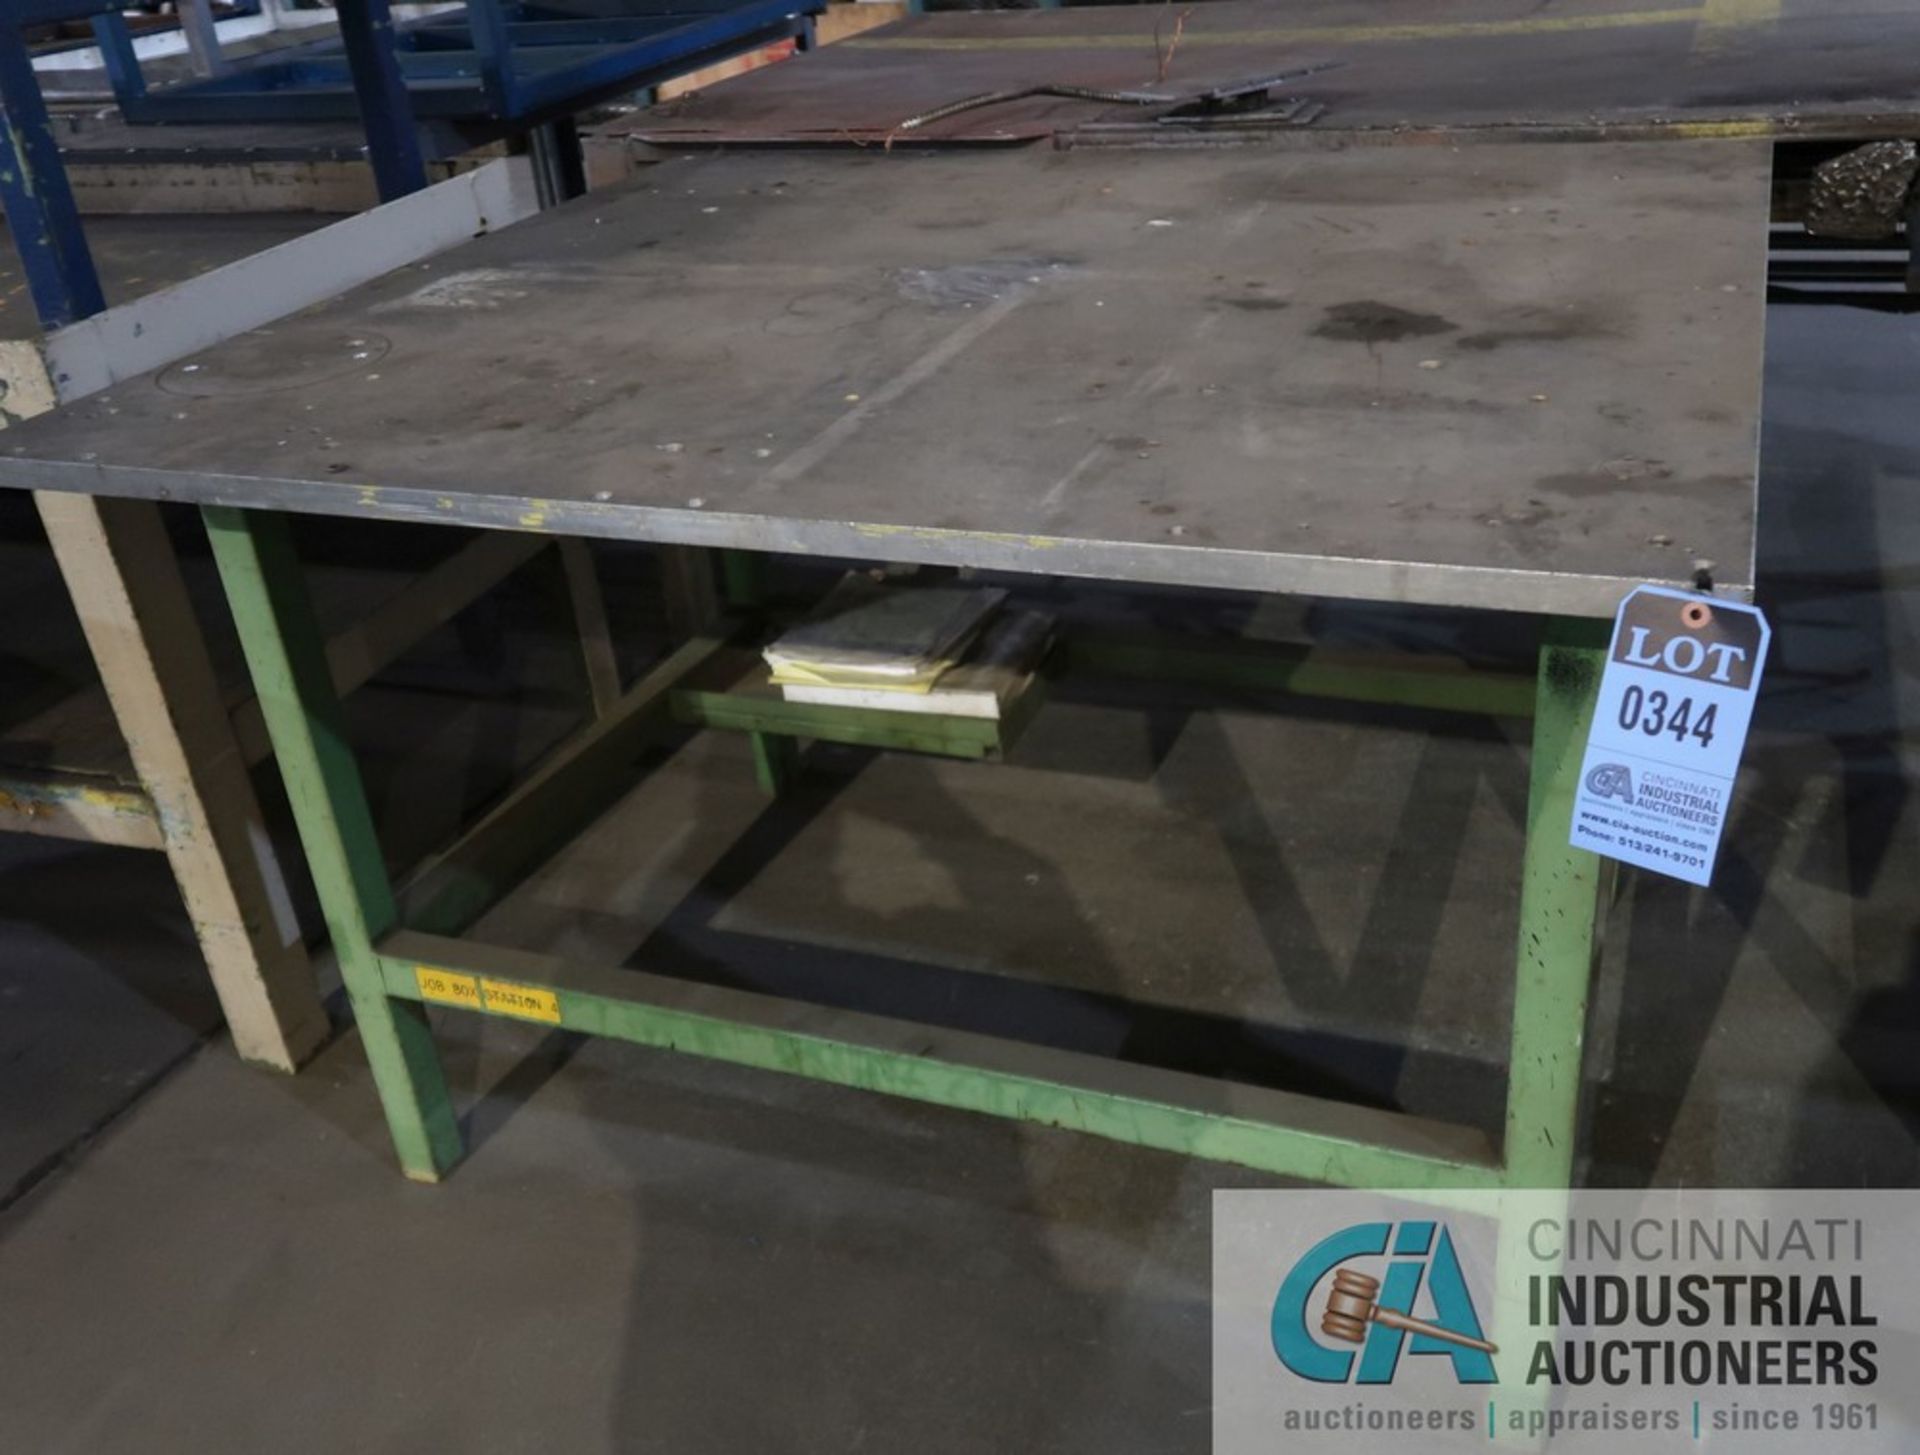 48" X 54' X 35-1/2" HIGH HEAVY DUTY WELDED STEEL FRAME TABLE WITH 1" THICK ALUMINUM PLATE